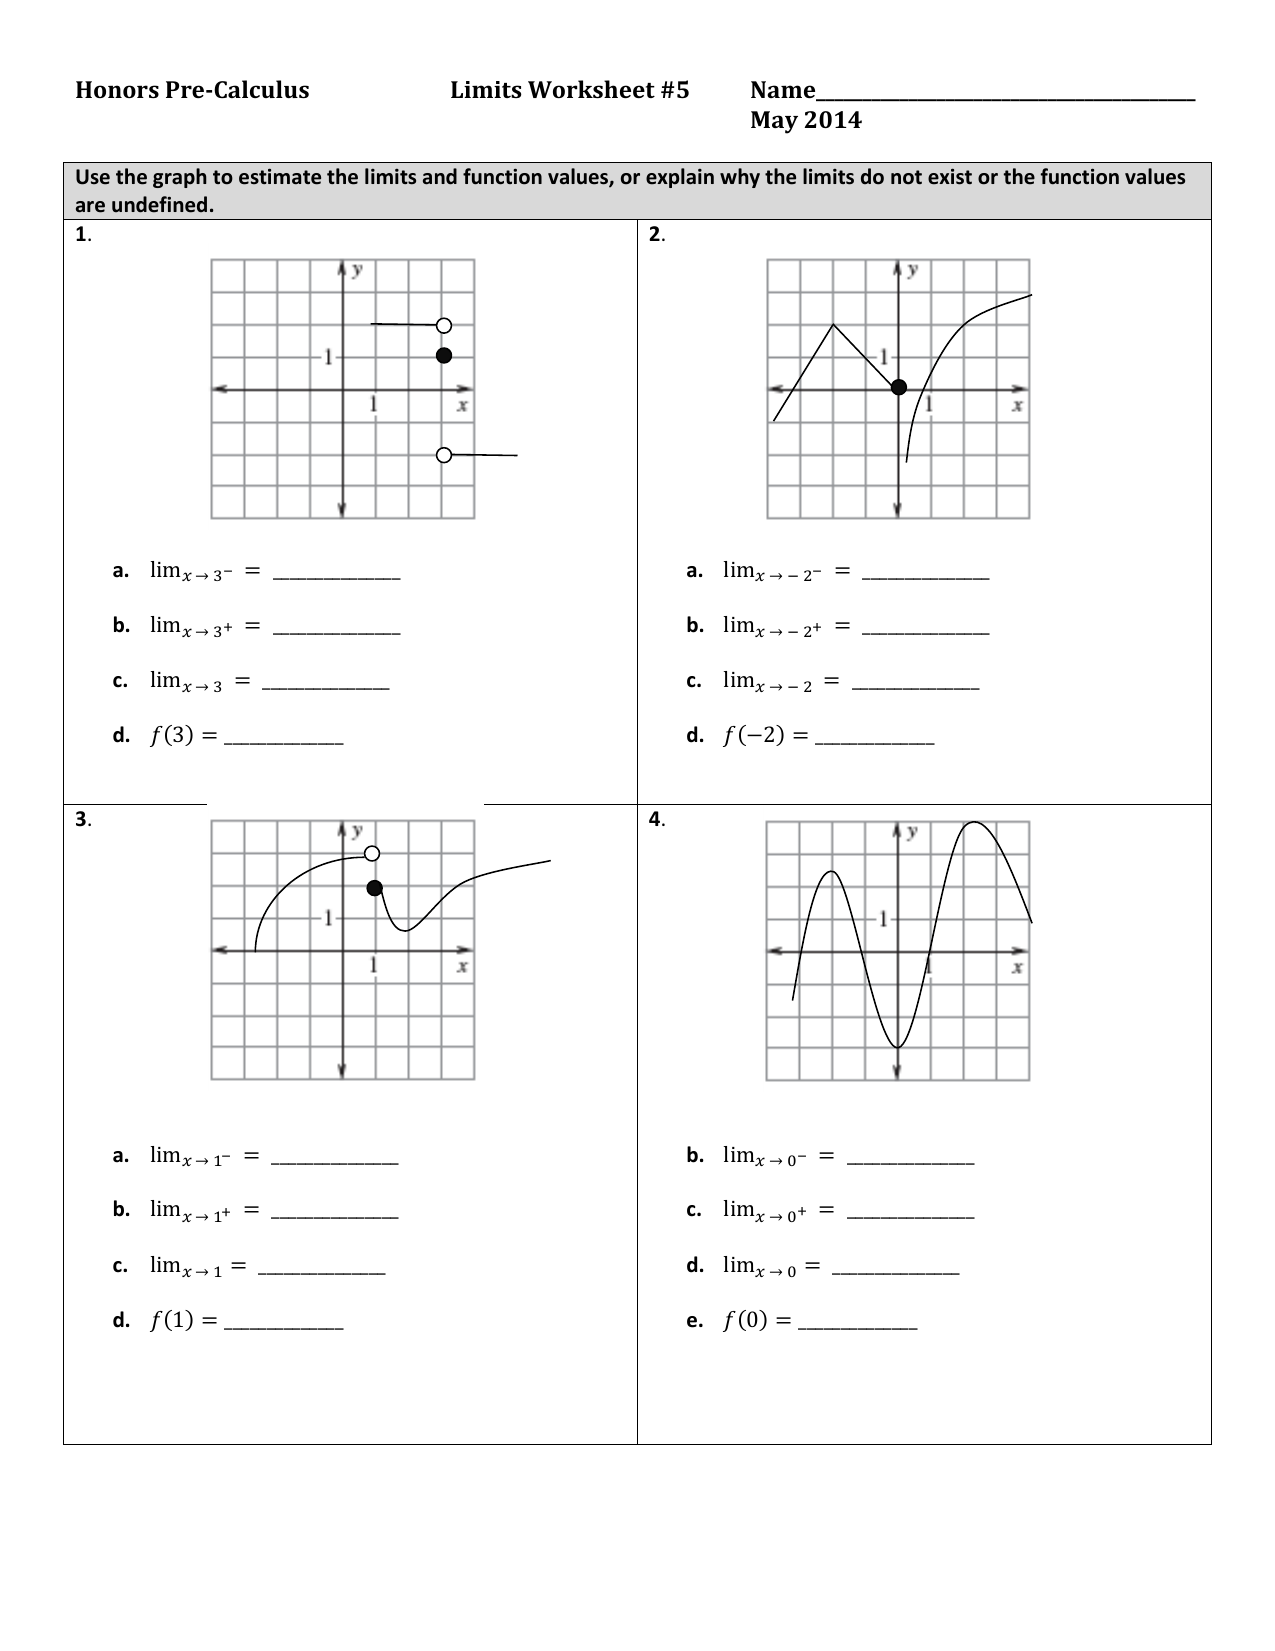 graphing-derivatives-worksheet-with-answers-graphworksheets